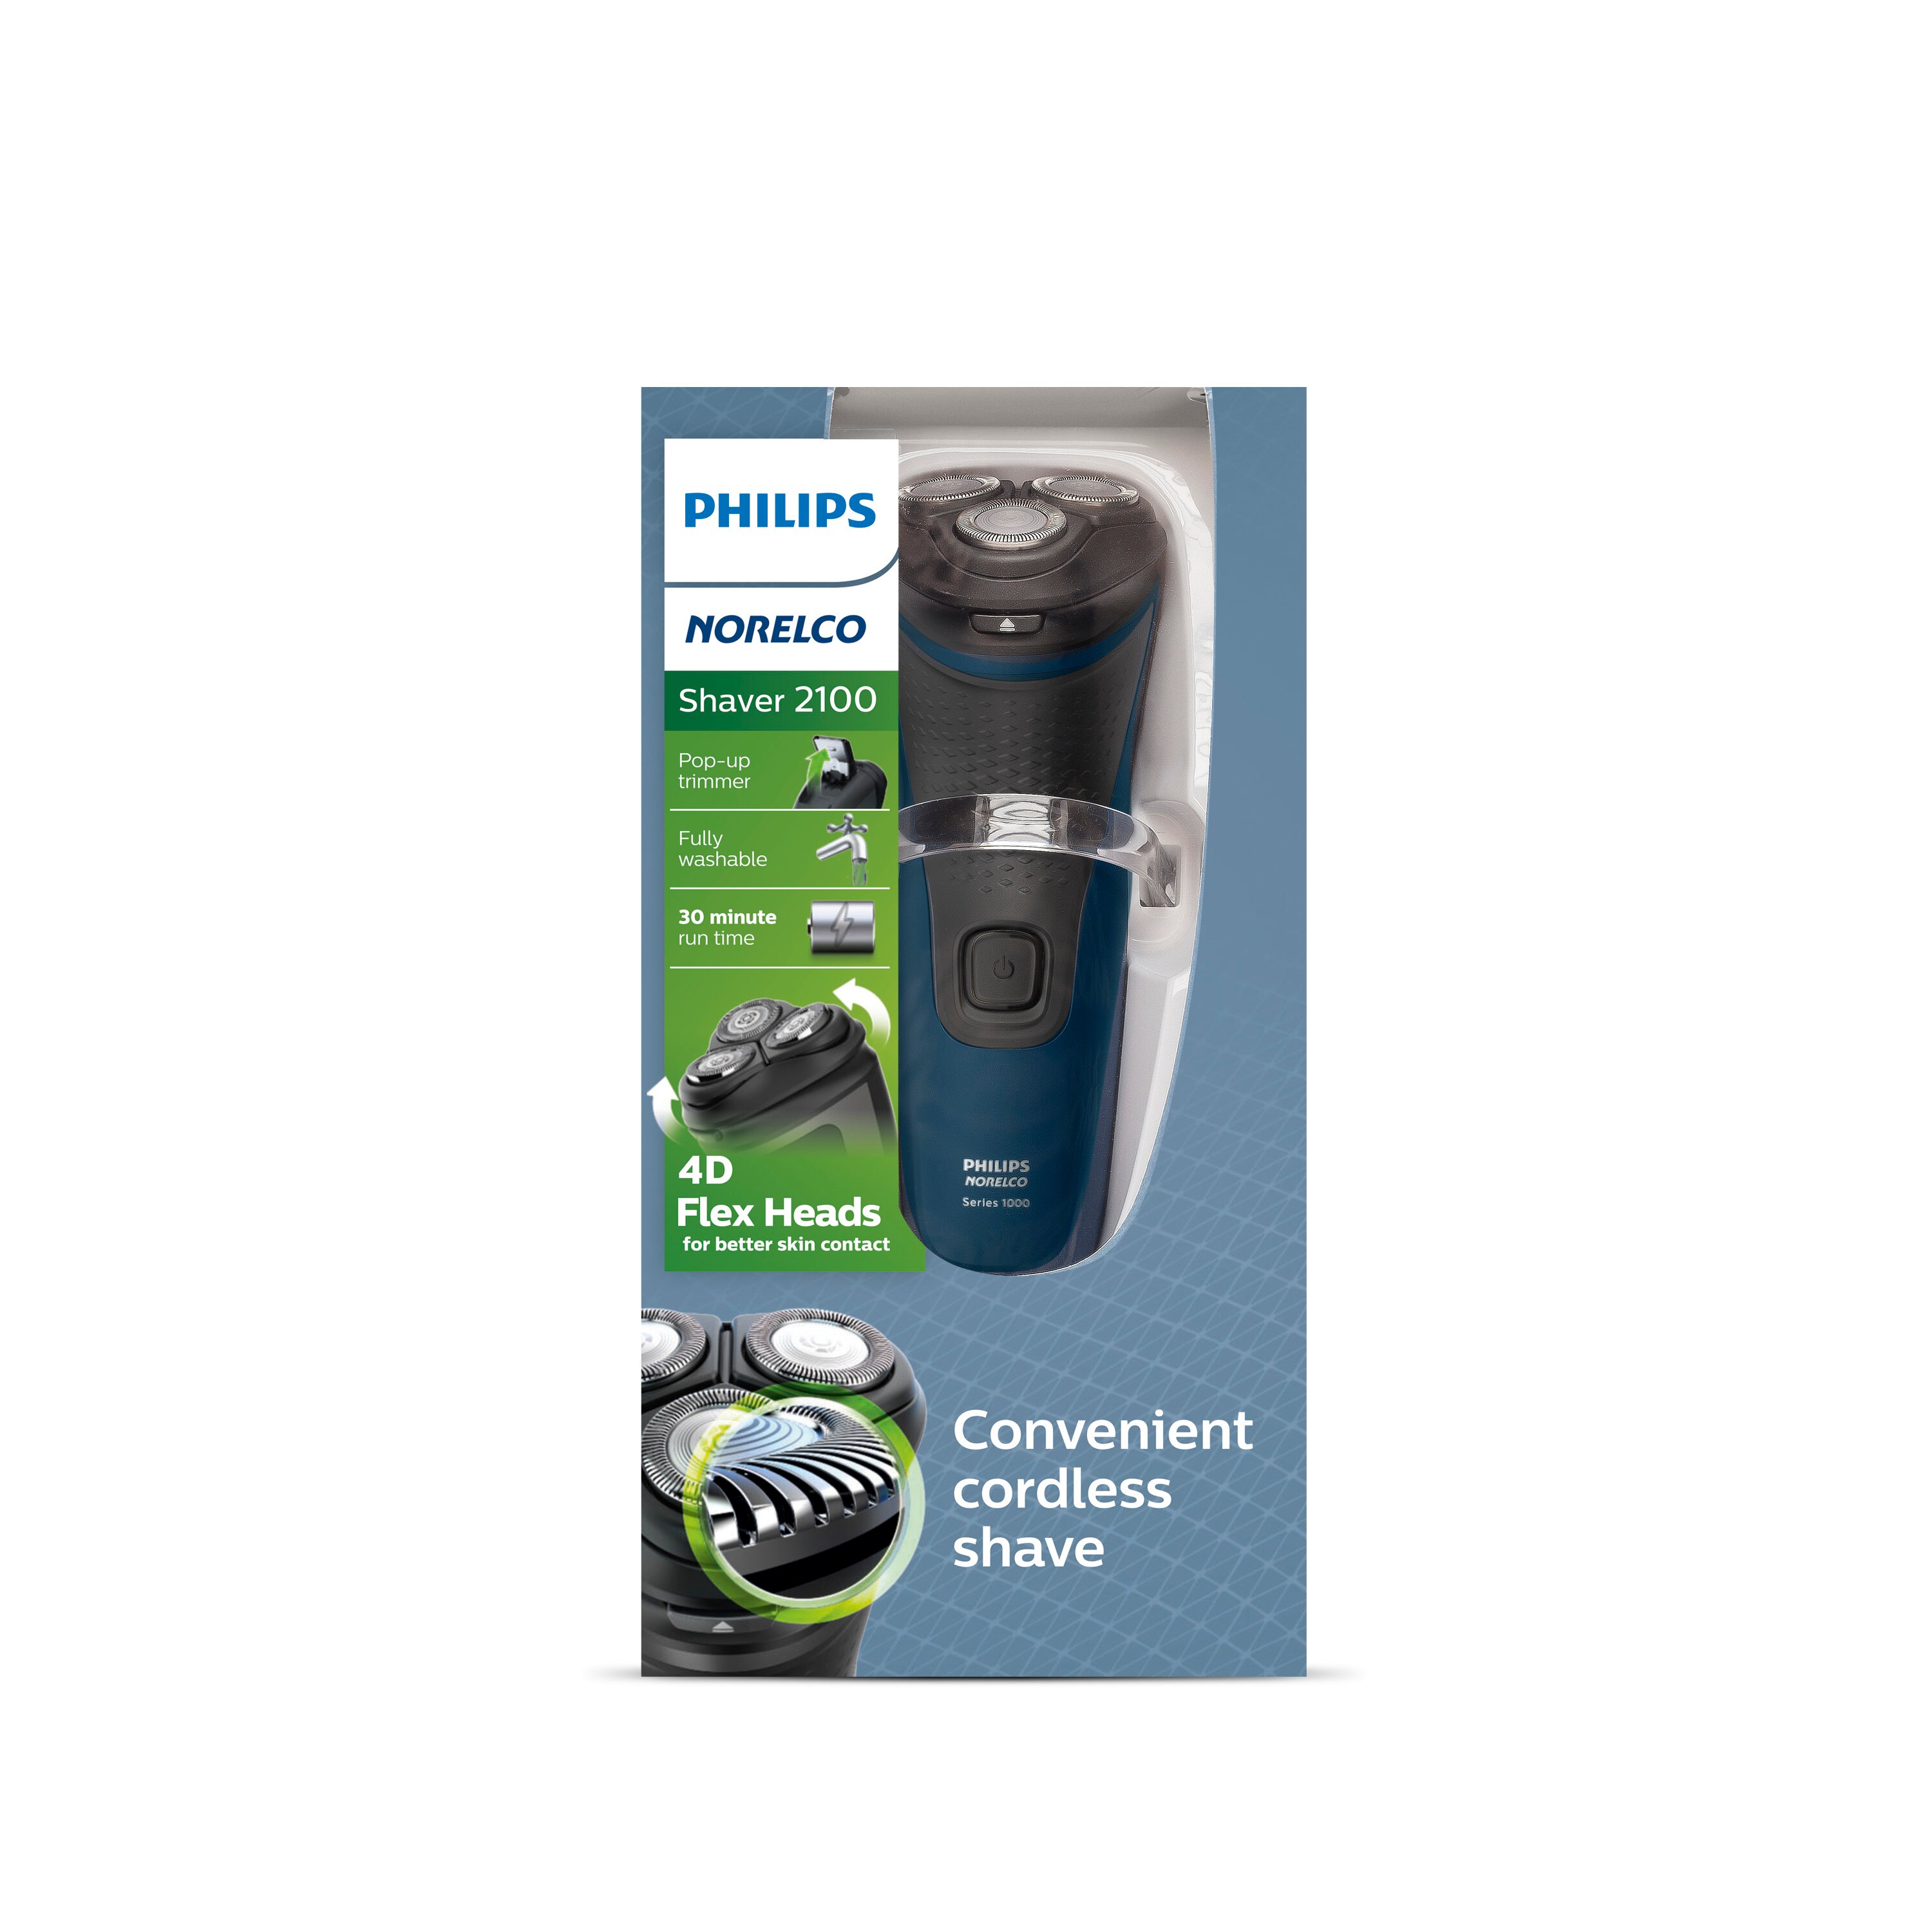 Philips Norelco Shaver 2100 Rechargeable Electric Trimmer and Shaver